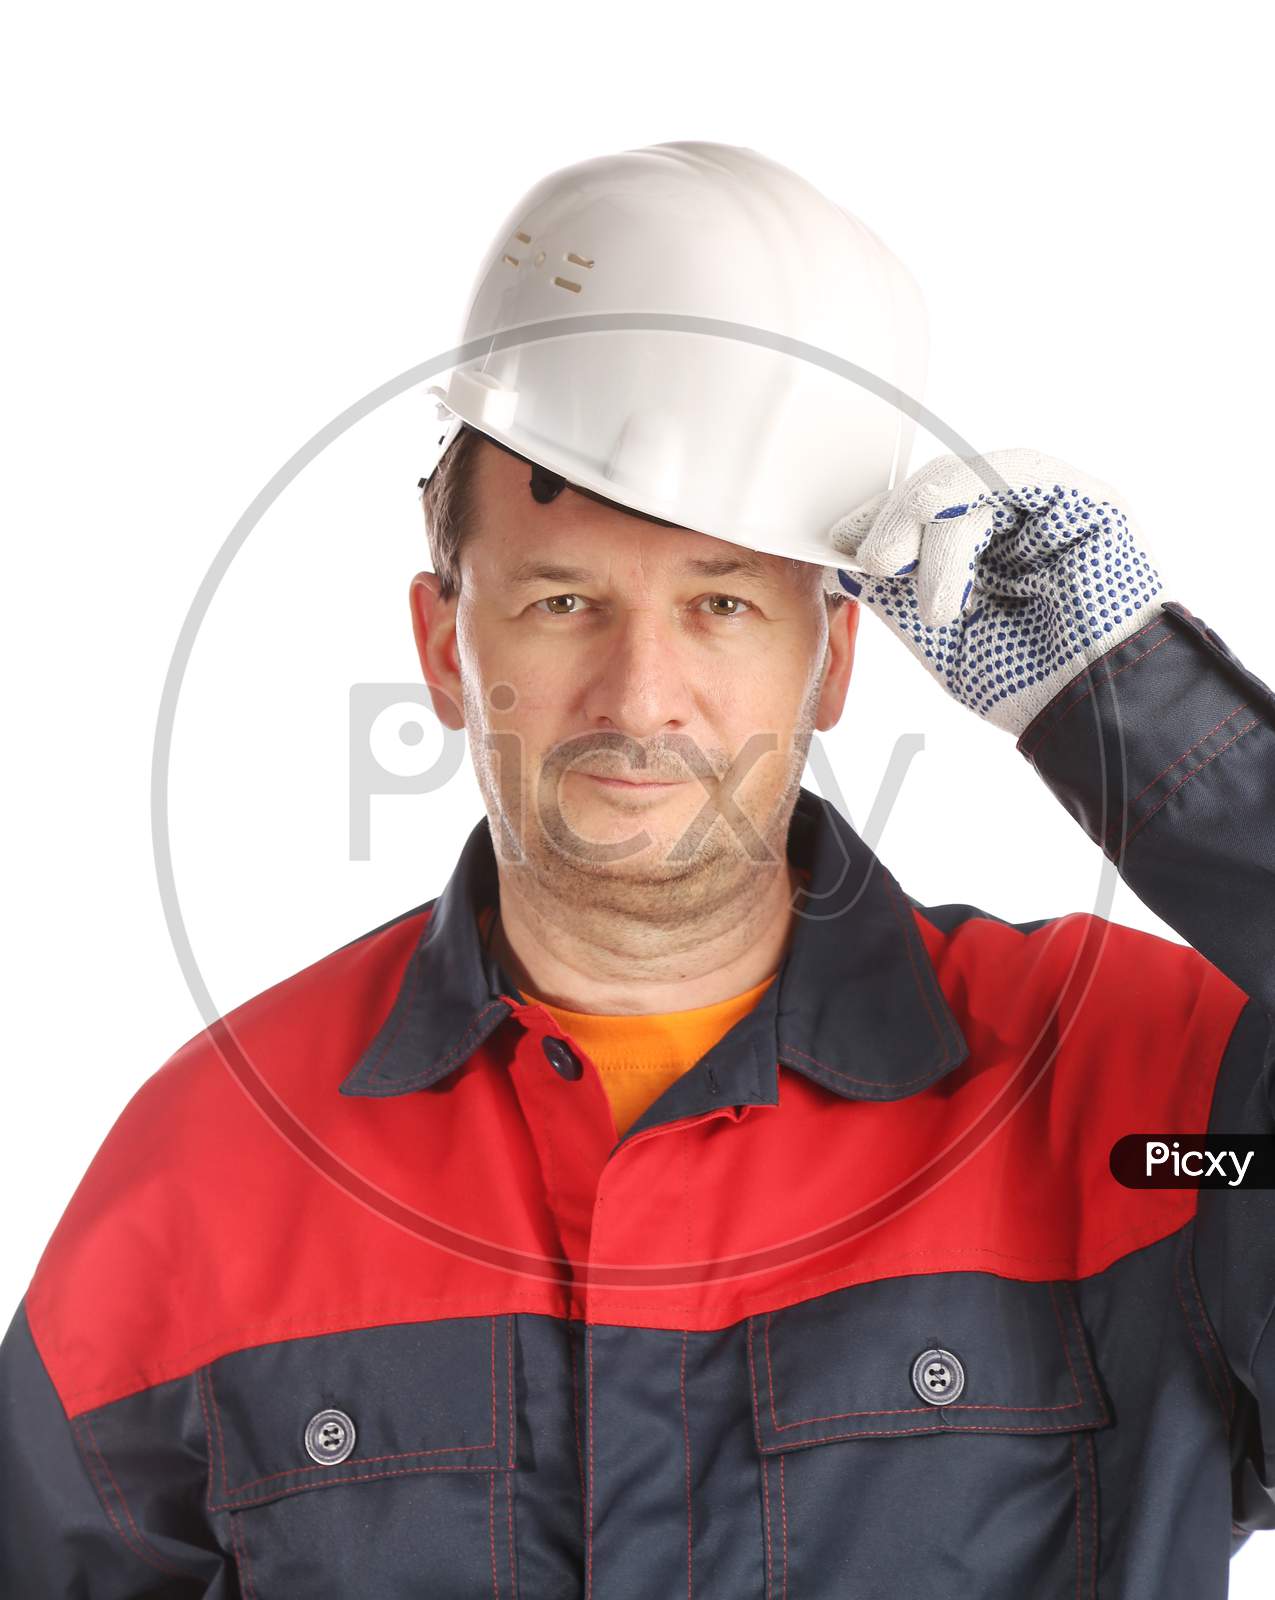 Confident Worker Portrait With Hard Hat. Isolated On A White Background.